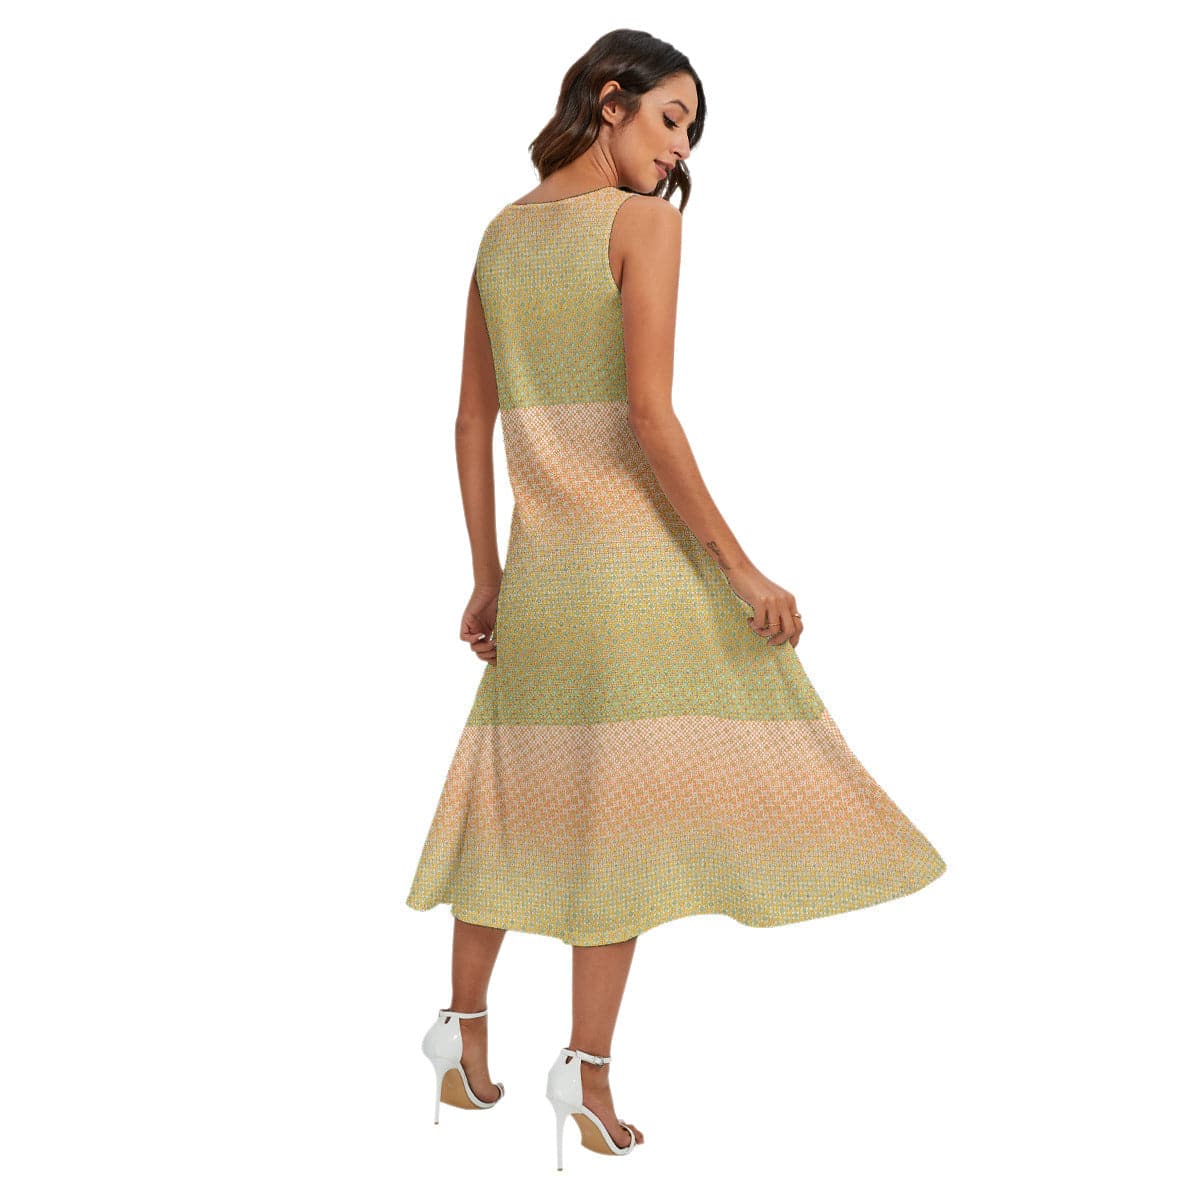 Soft green and Rosa fine patterned trendy 2022 Women's Sleeveless Dress With Diagonal Pocket, by Sensus Studio Design